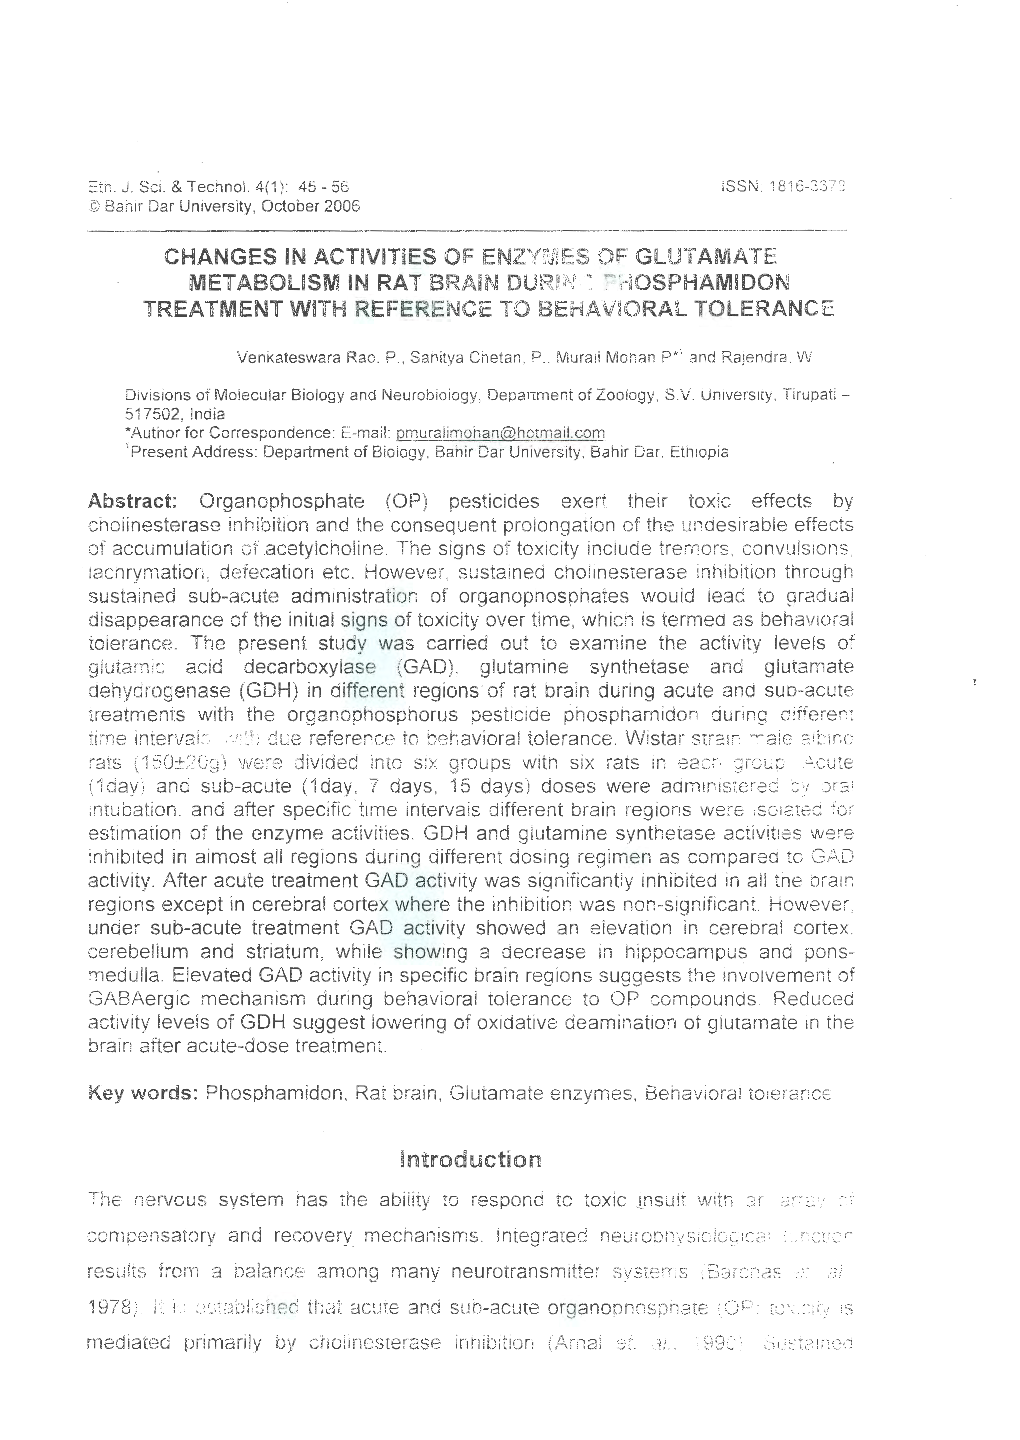 Changes in Activities of Enzymes of Glutamate Metabolism in Rat Brain Dur!N·~ :""Hosphamidon Treatment with Reference to Behavioral Tolerance